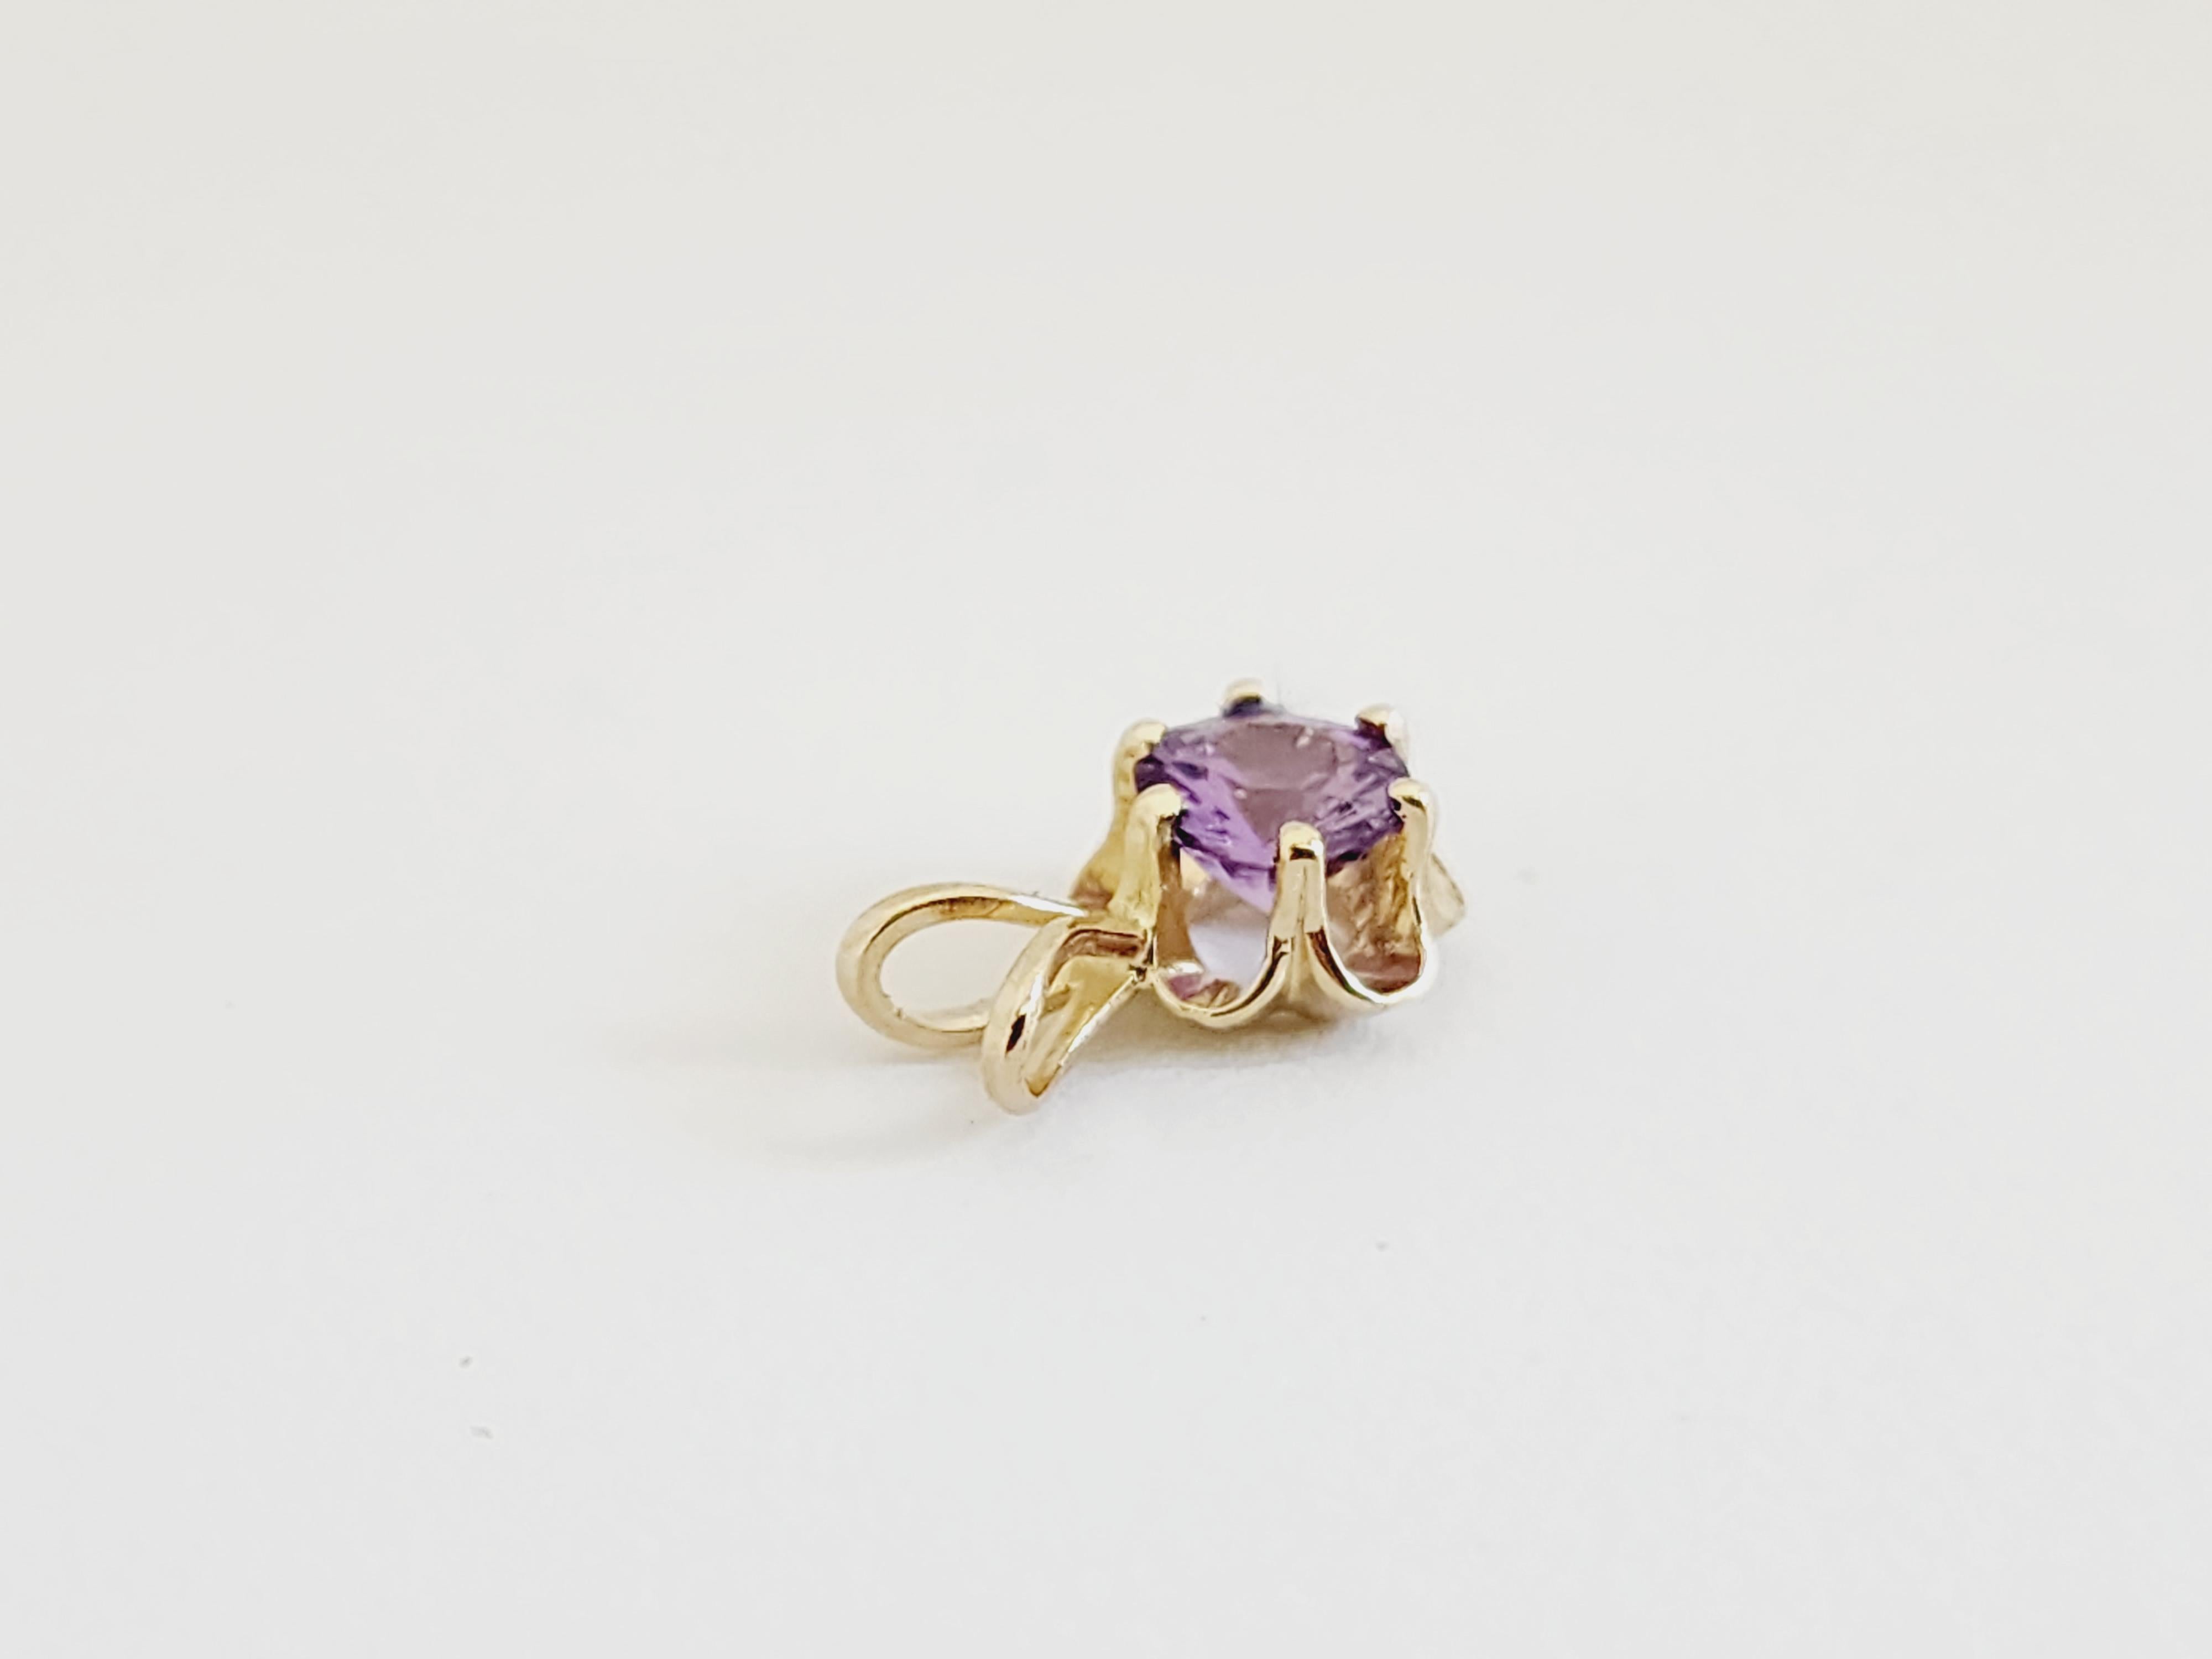 0.56 Carat Purple Sapphire Pendant 14 Karat Yellow Gold In New Condition For Sale In Great Neck, NY